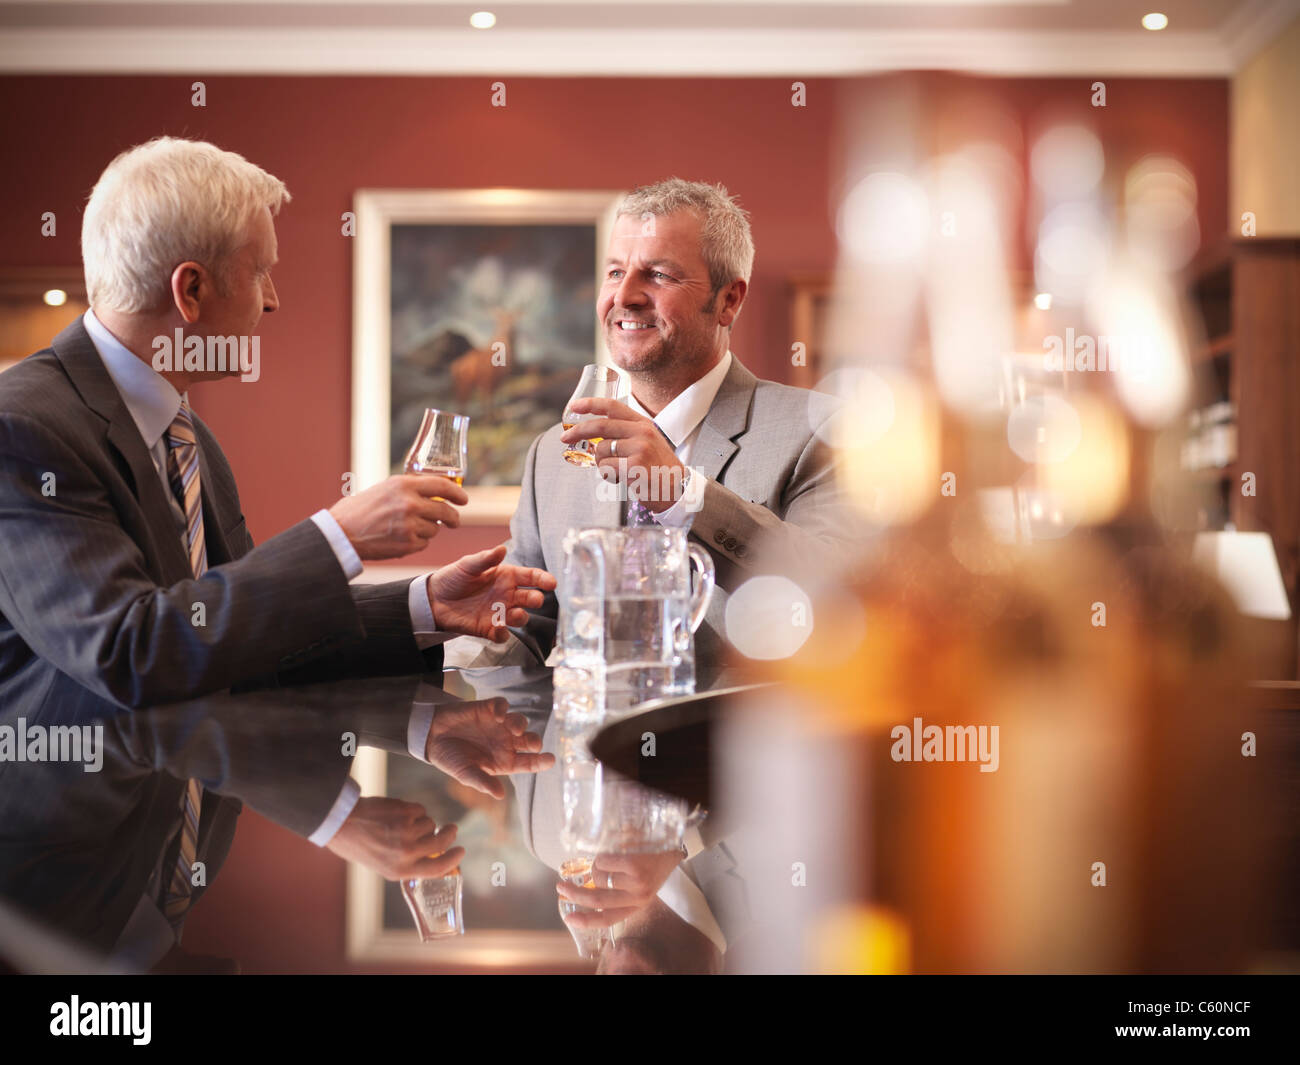 Businessmen drinking together in bar Stock Photo